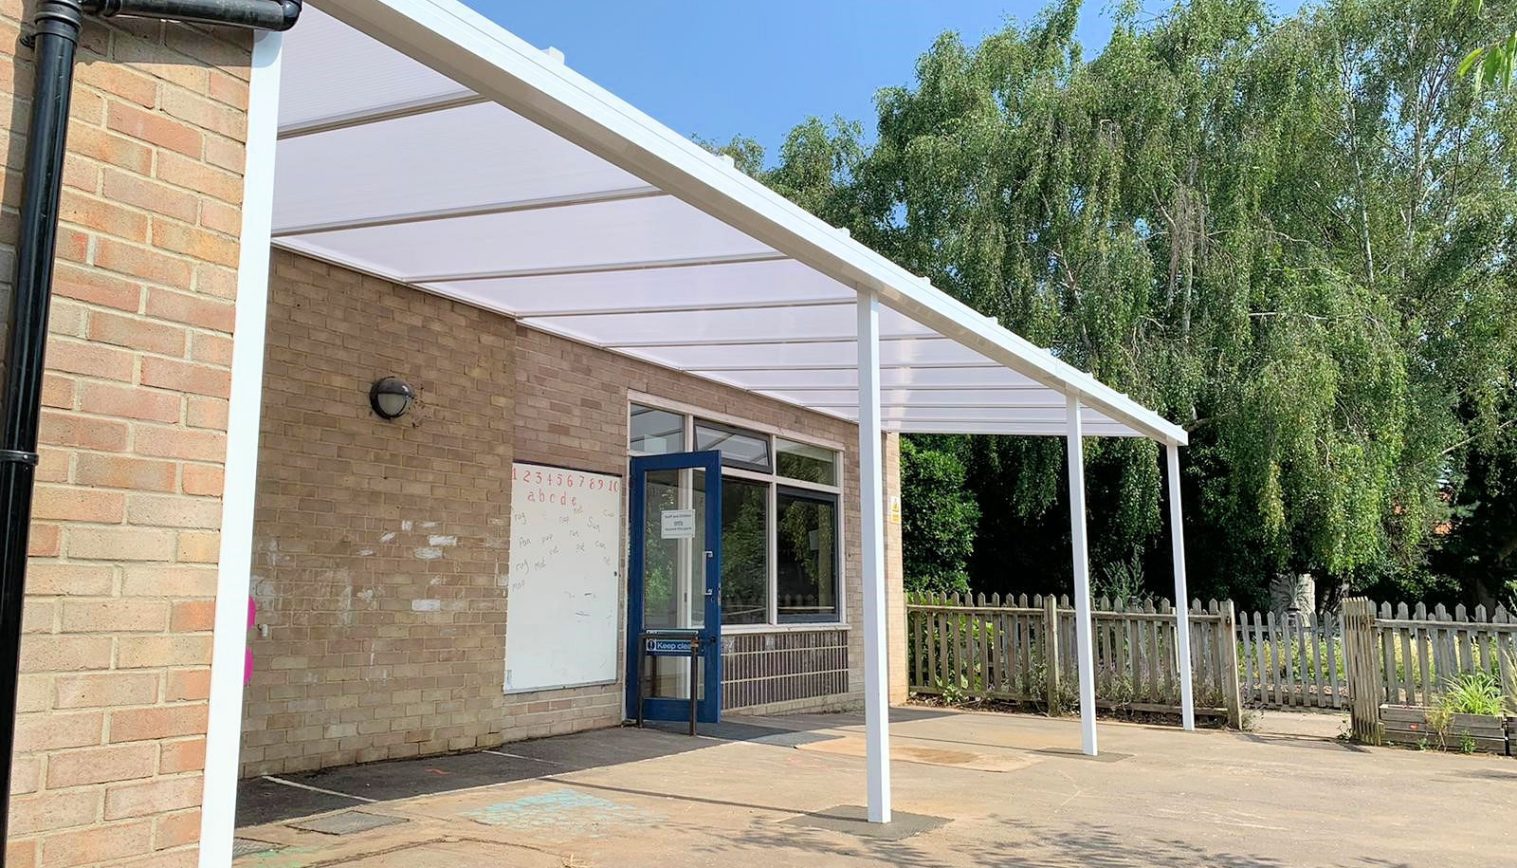 Kyson Primary School – Wall Mounted Canopy